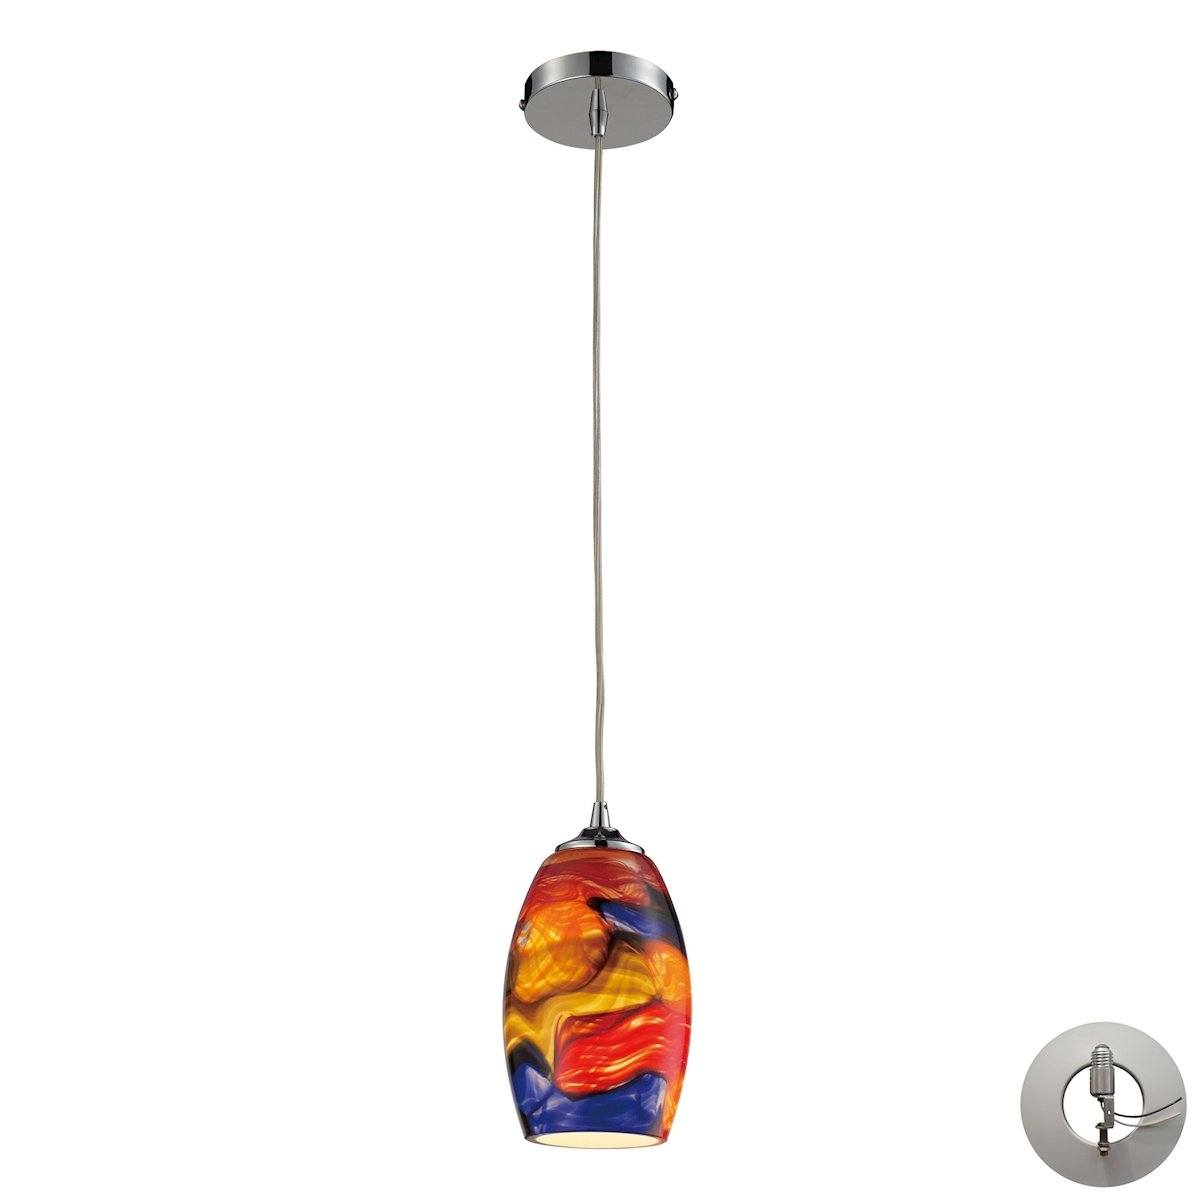 Surrealist Pendant In Polished Chrome And Multicolor Glass - Includes Recessed Lighting Kit Ceiling Elk Lighting 